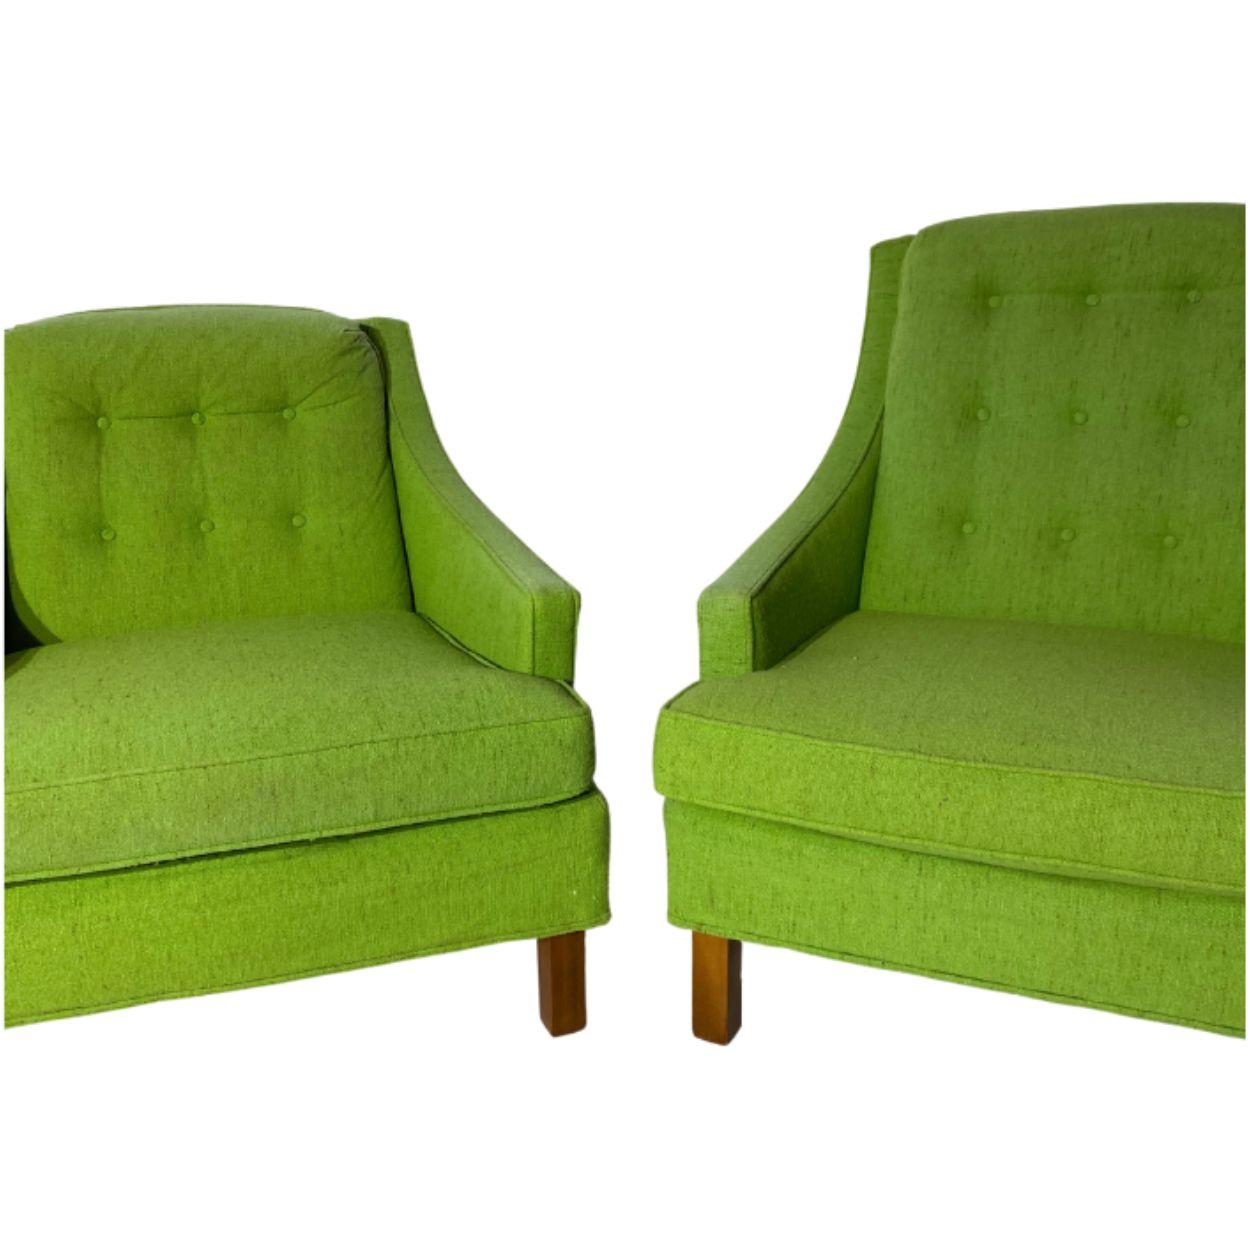 Beautiful pair of avocado green his and hers Mid-Century Modern Broyhill lounge chairs!

Specific measurements:

His:

Height: 36 in
Width: 29.5 in
Depth: 28 in
Seat Height: 16 in
Arm Height: 20 in

Hers:

Height: 30.5 in
Width: 29.5